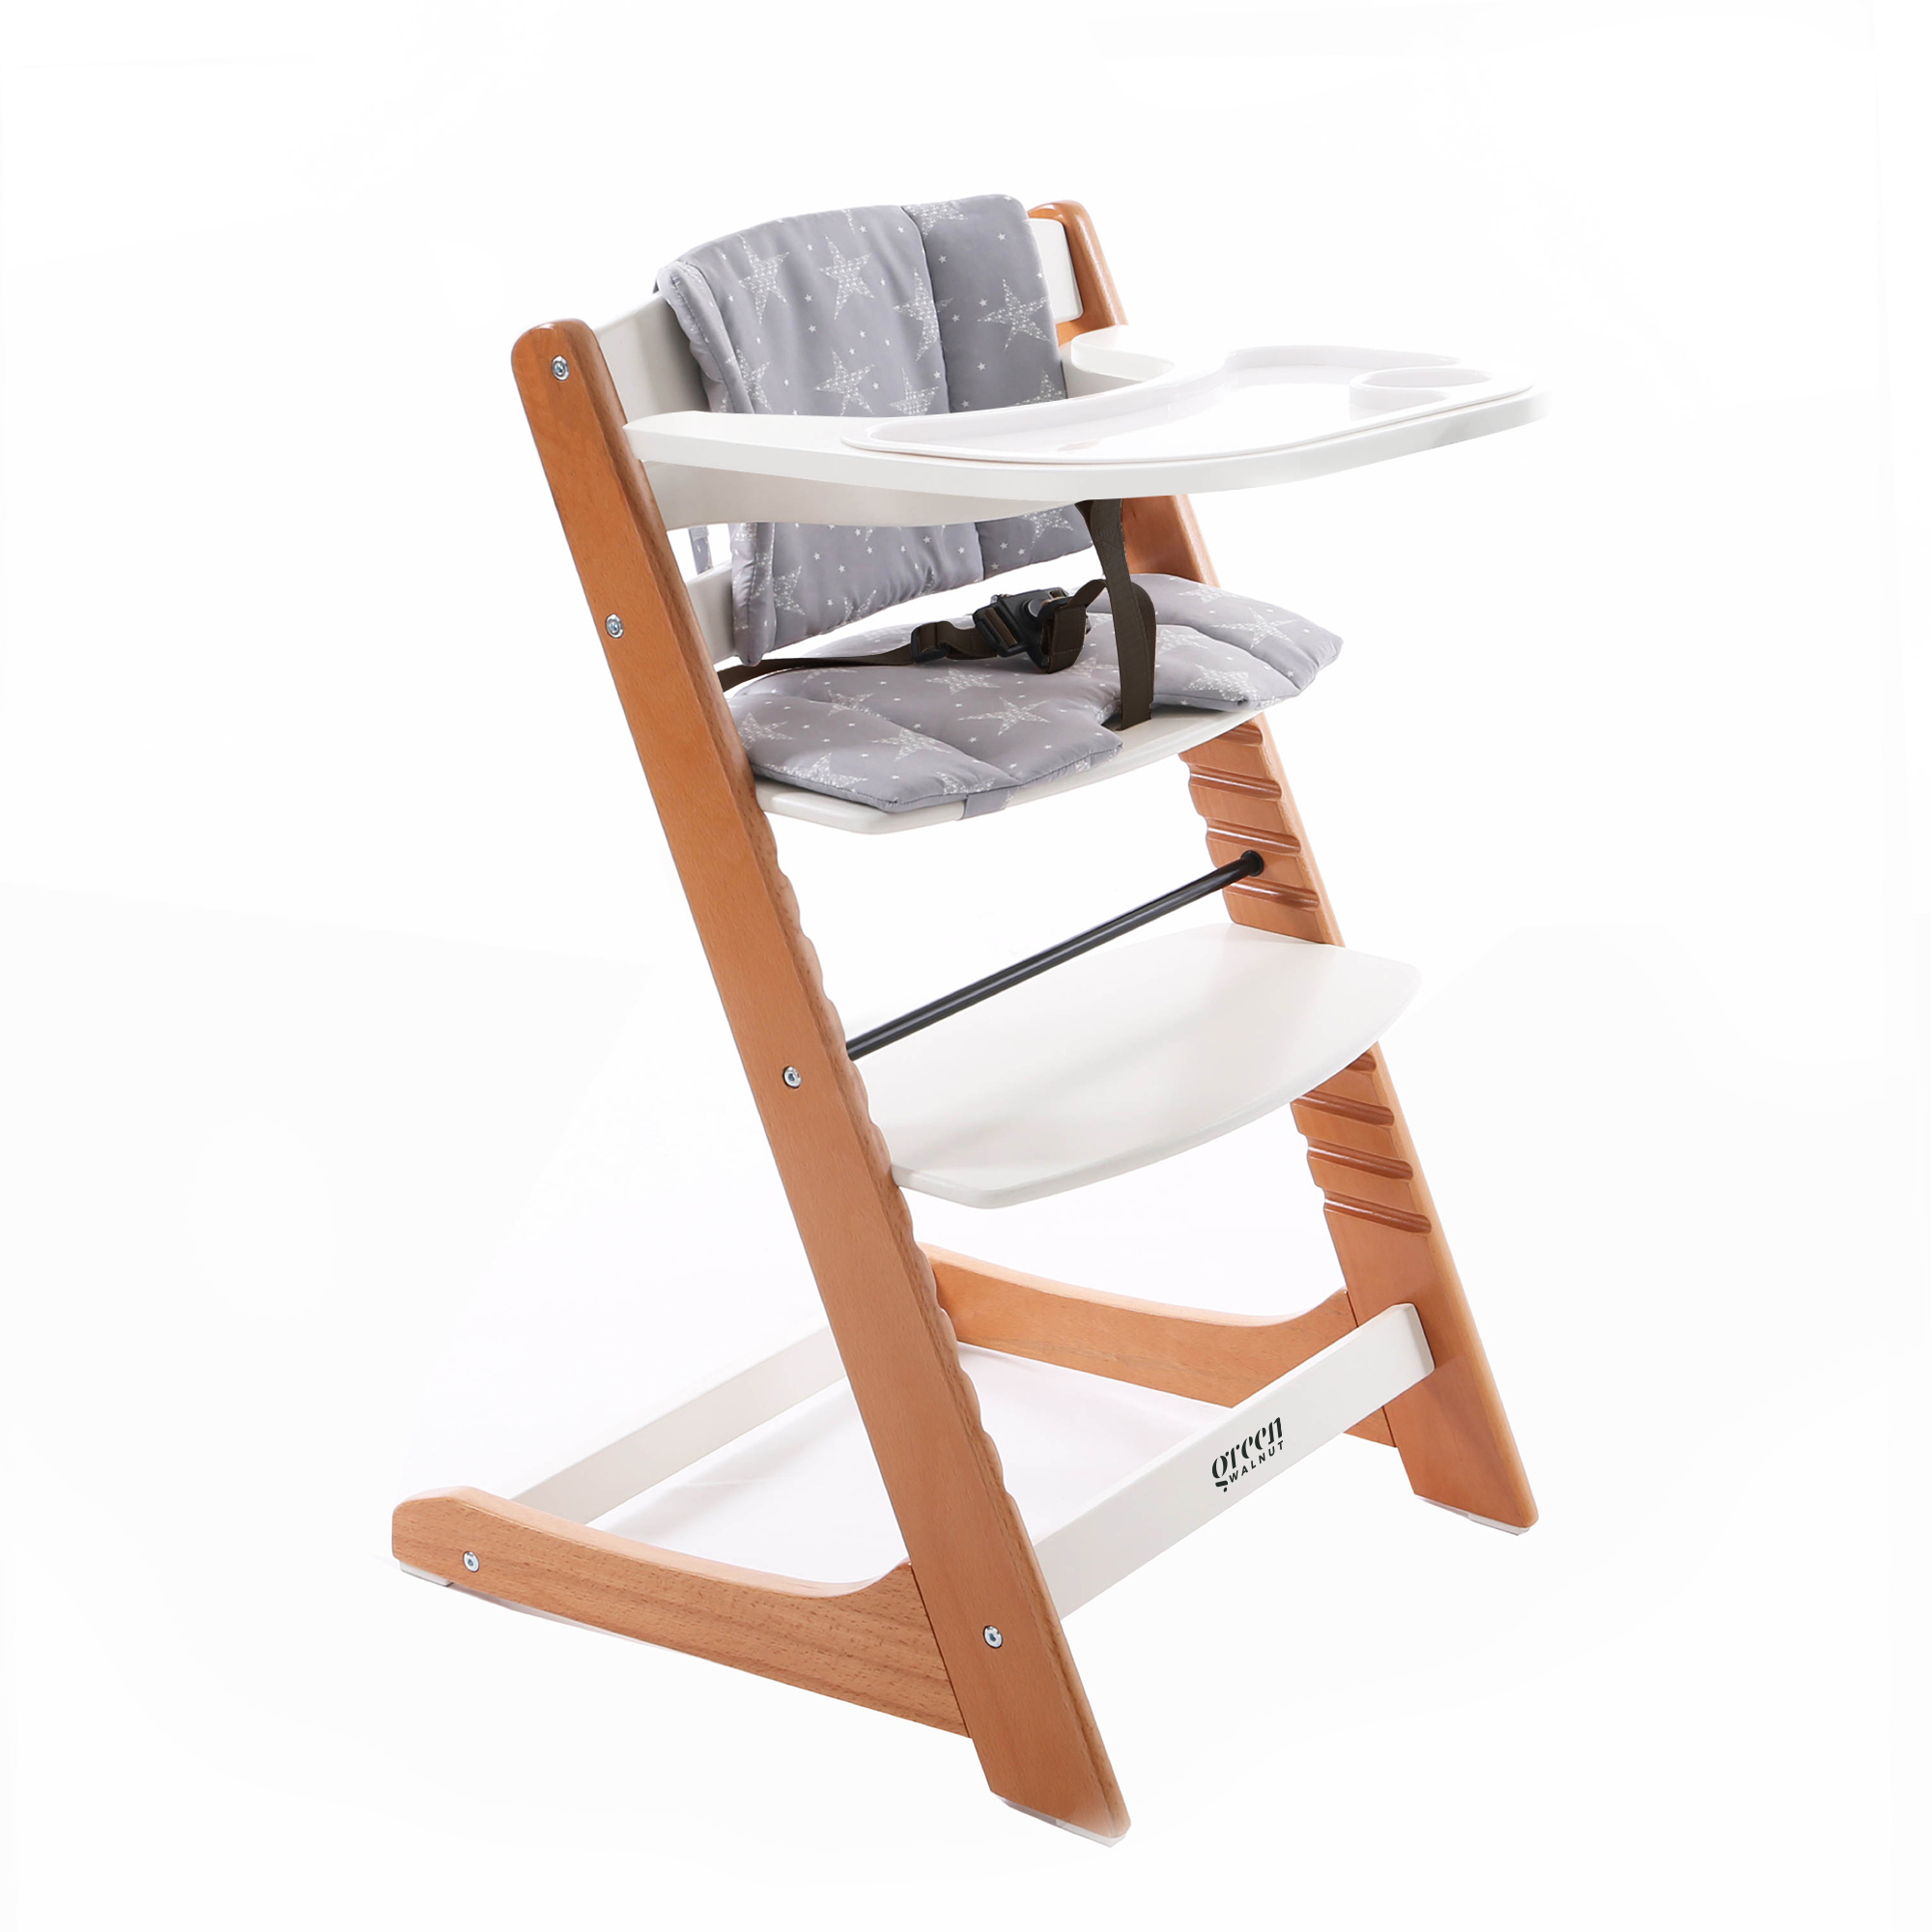 Wooden High Chair For Babies And Toddlers | Includes ( Seat Cushion ,tray & 5 Point Belt )